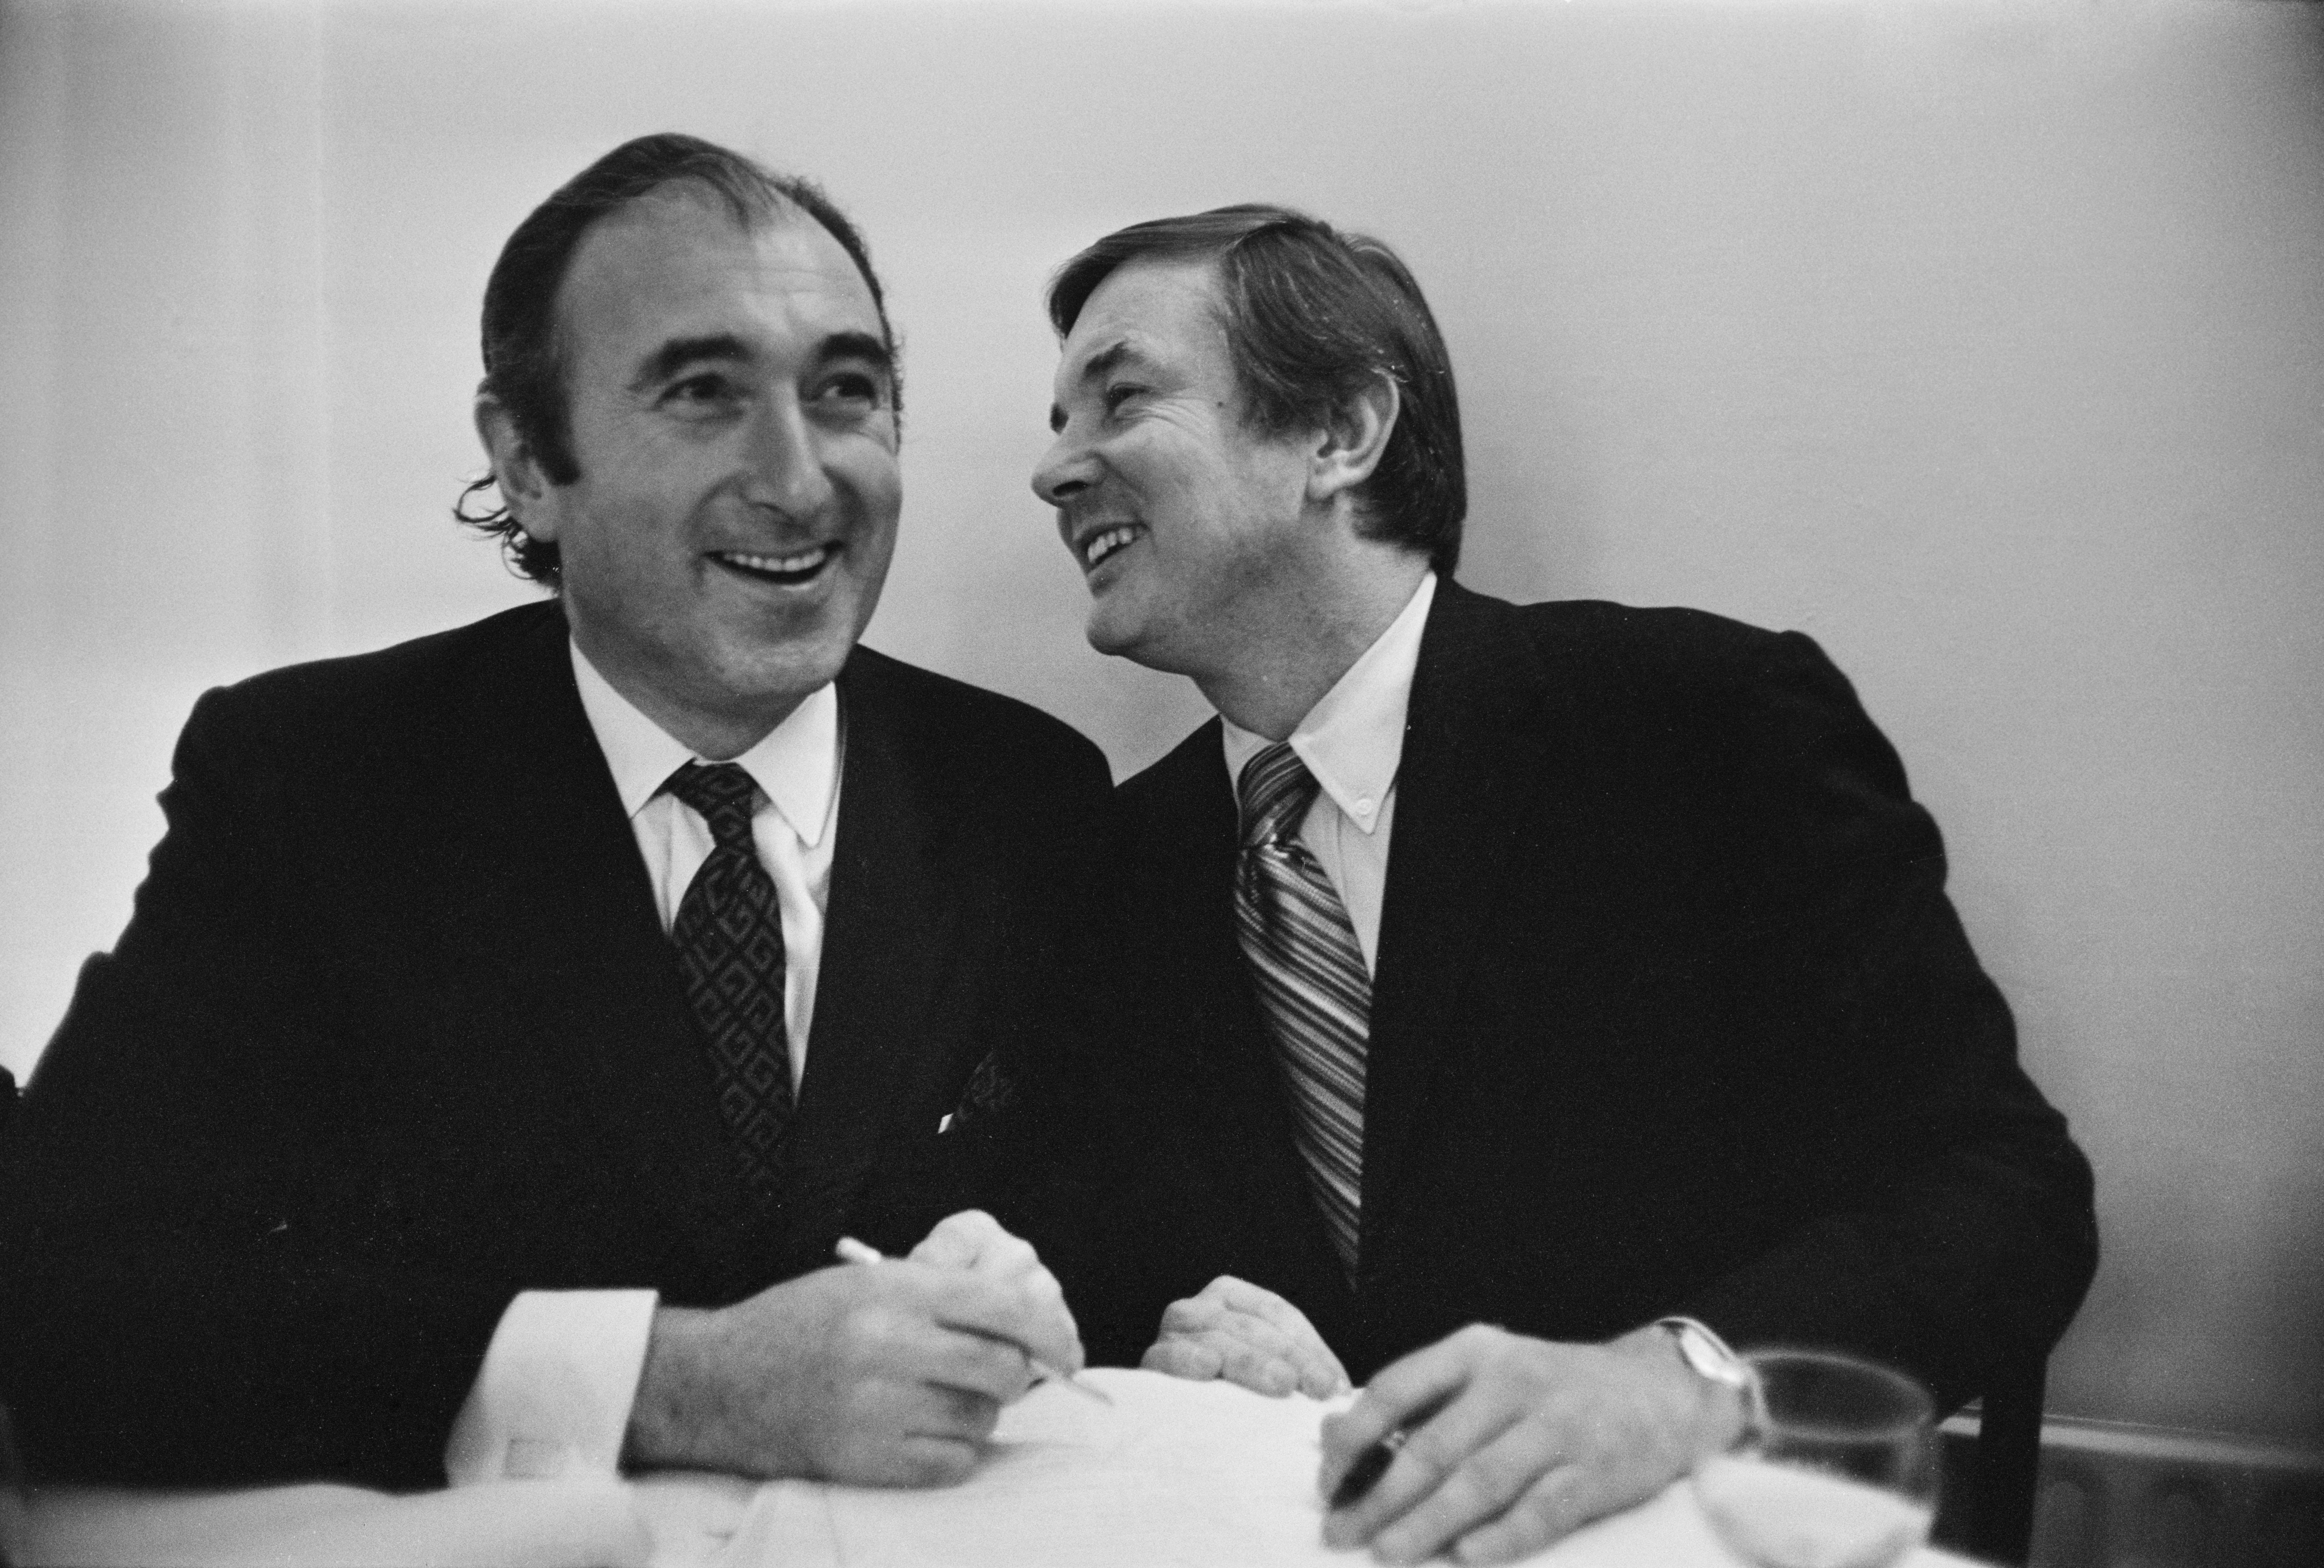 Hollywood super agent Jerry Perenchio (right) played a key role in setting up the fight